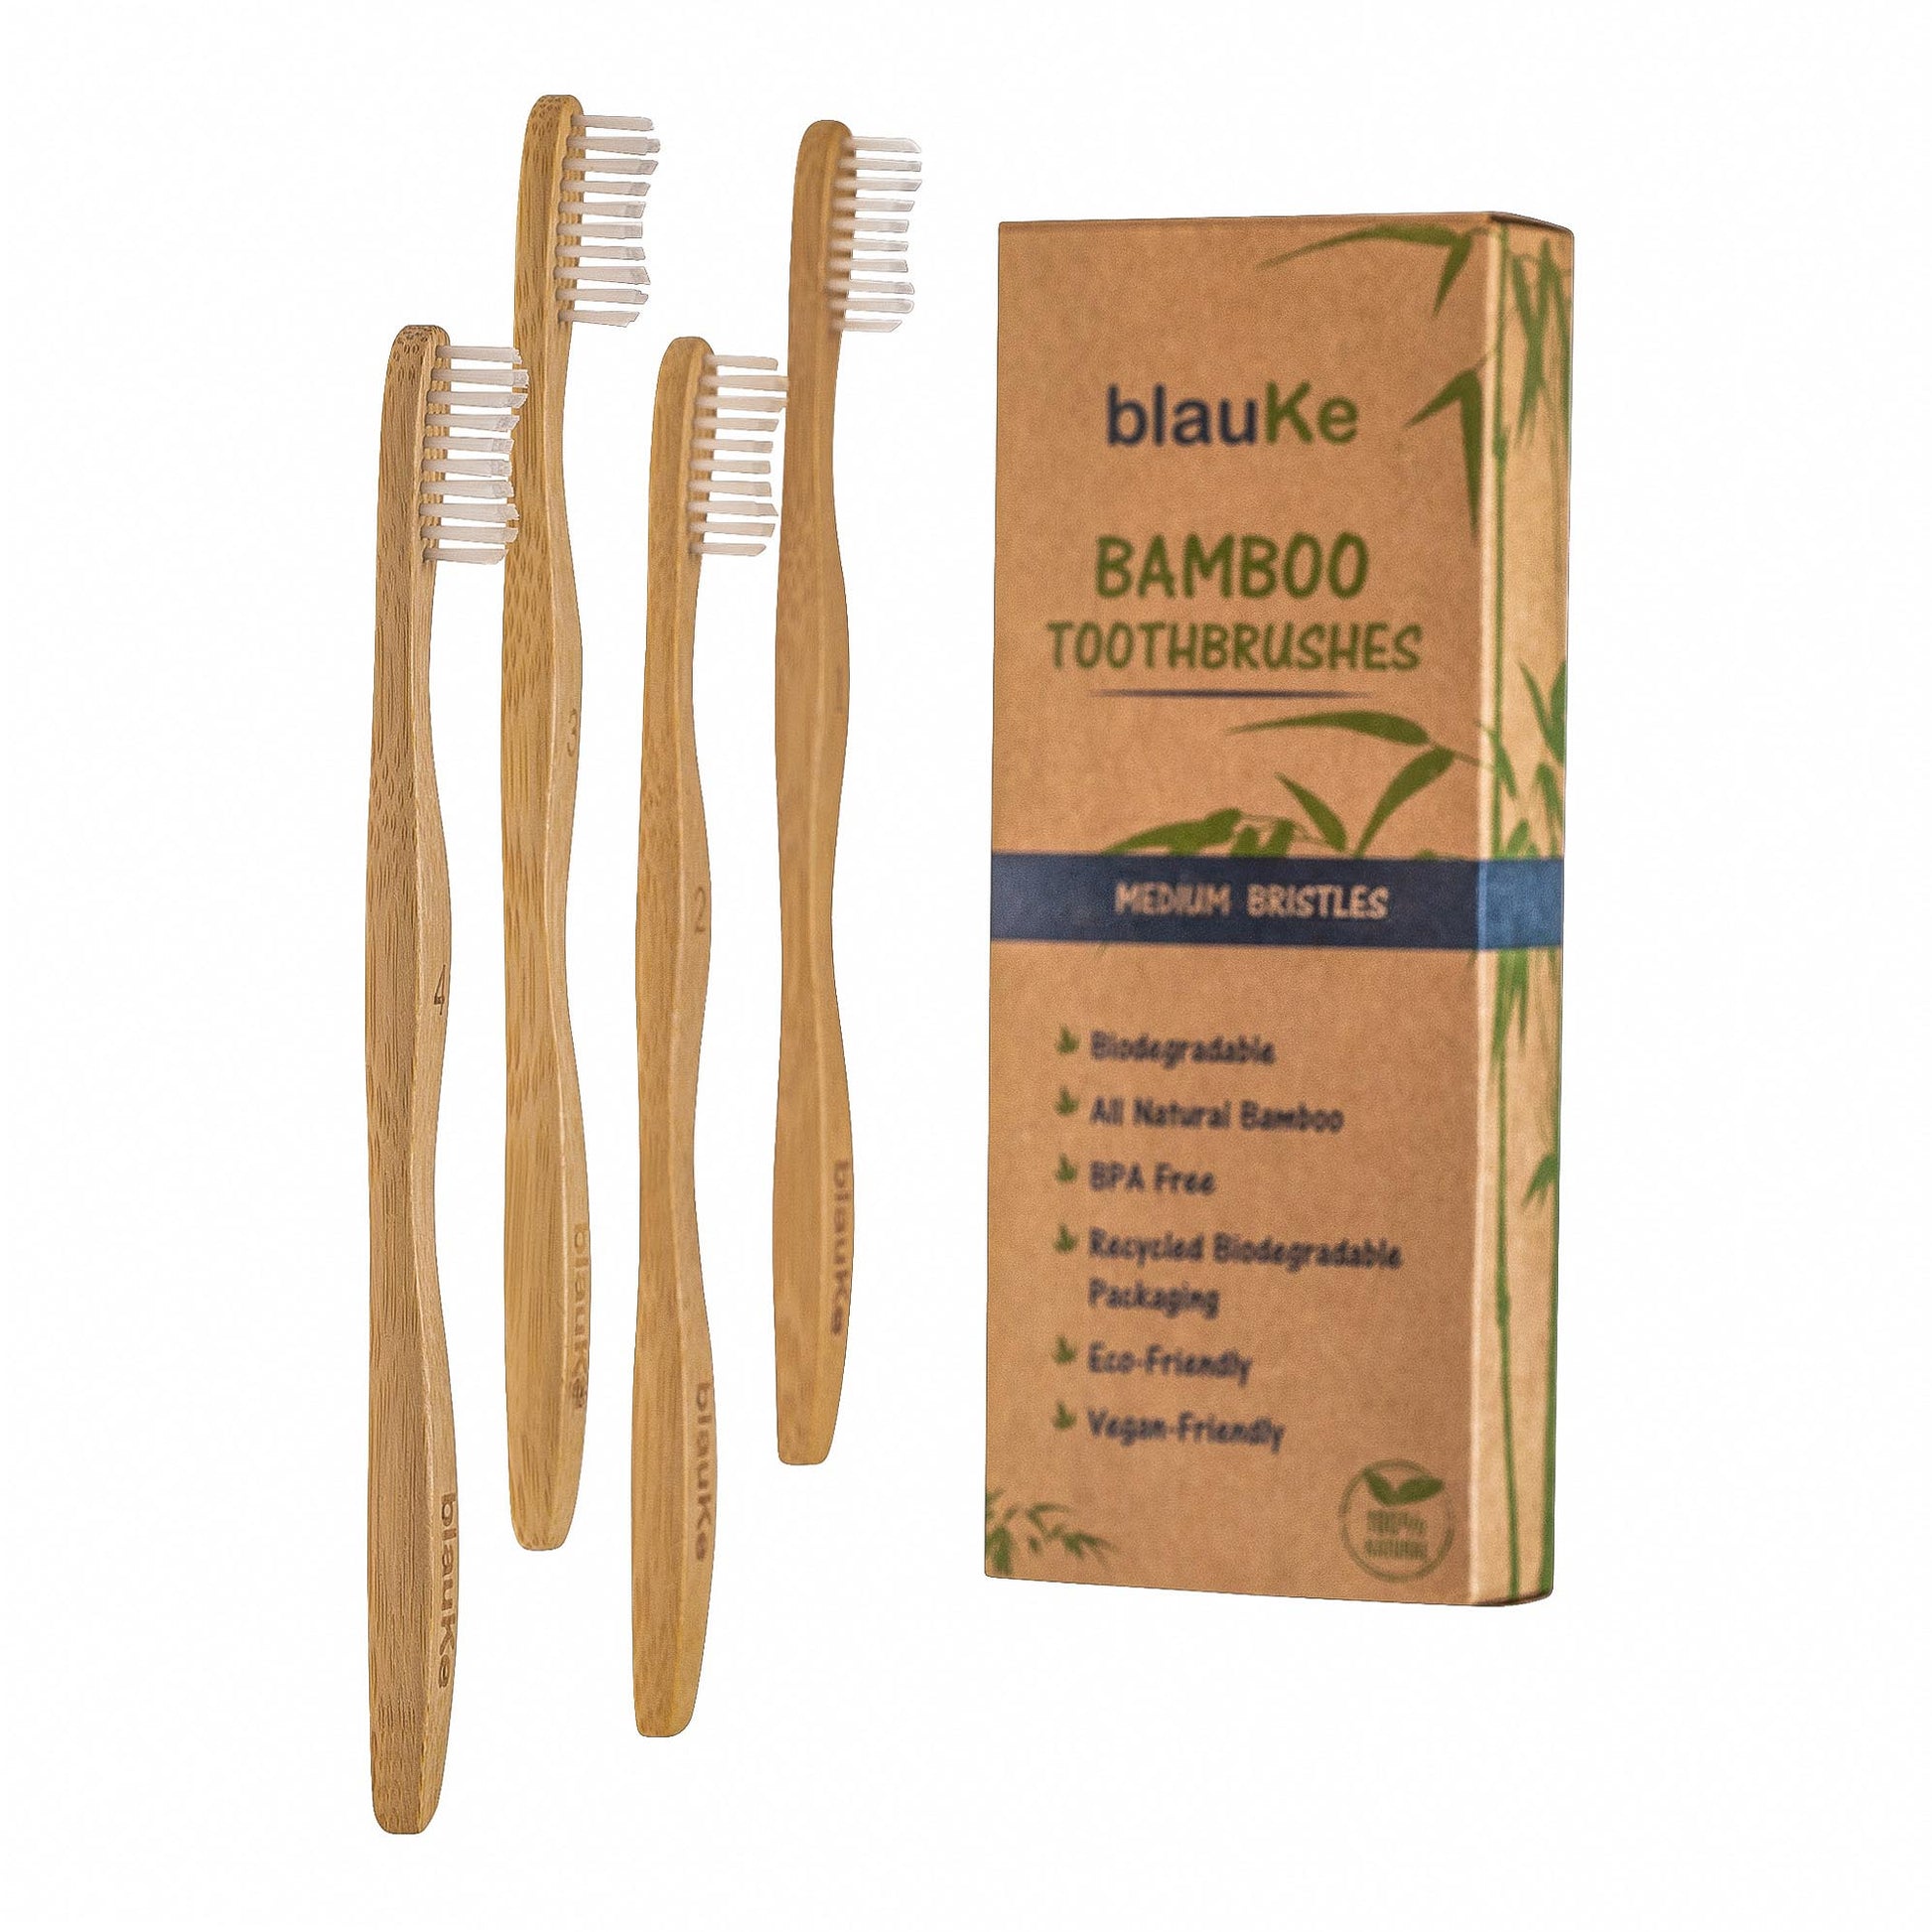 Bamboo Toothbrush Set 4-Pack - Bamboo Toothbrushes with Medium Bristles for Adults - Eco-Friendly, Biodegradable, Natural Wooden Toothbrushes-7